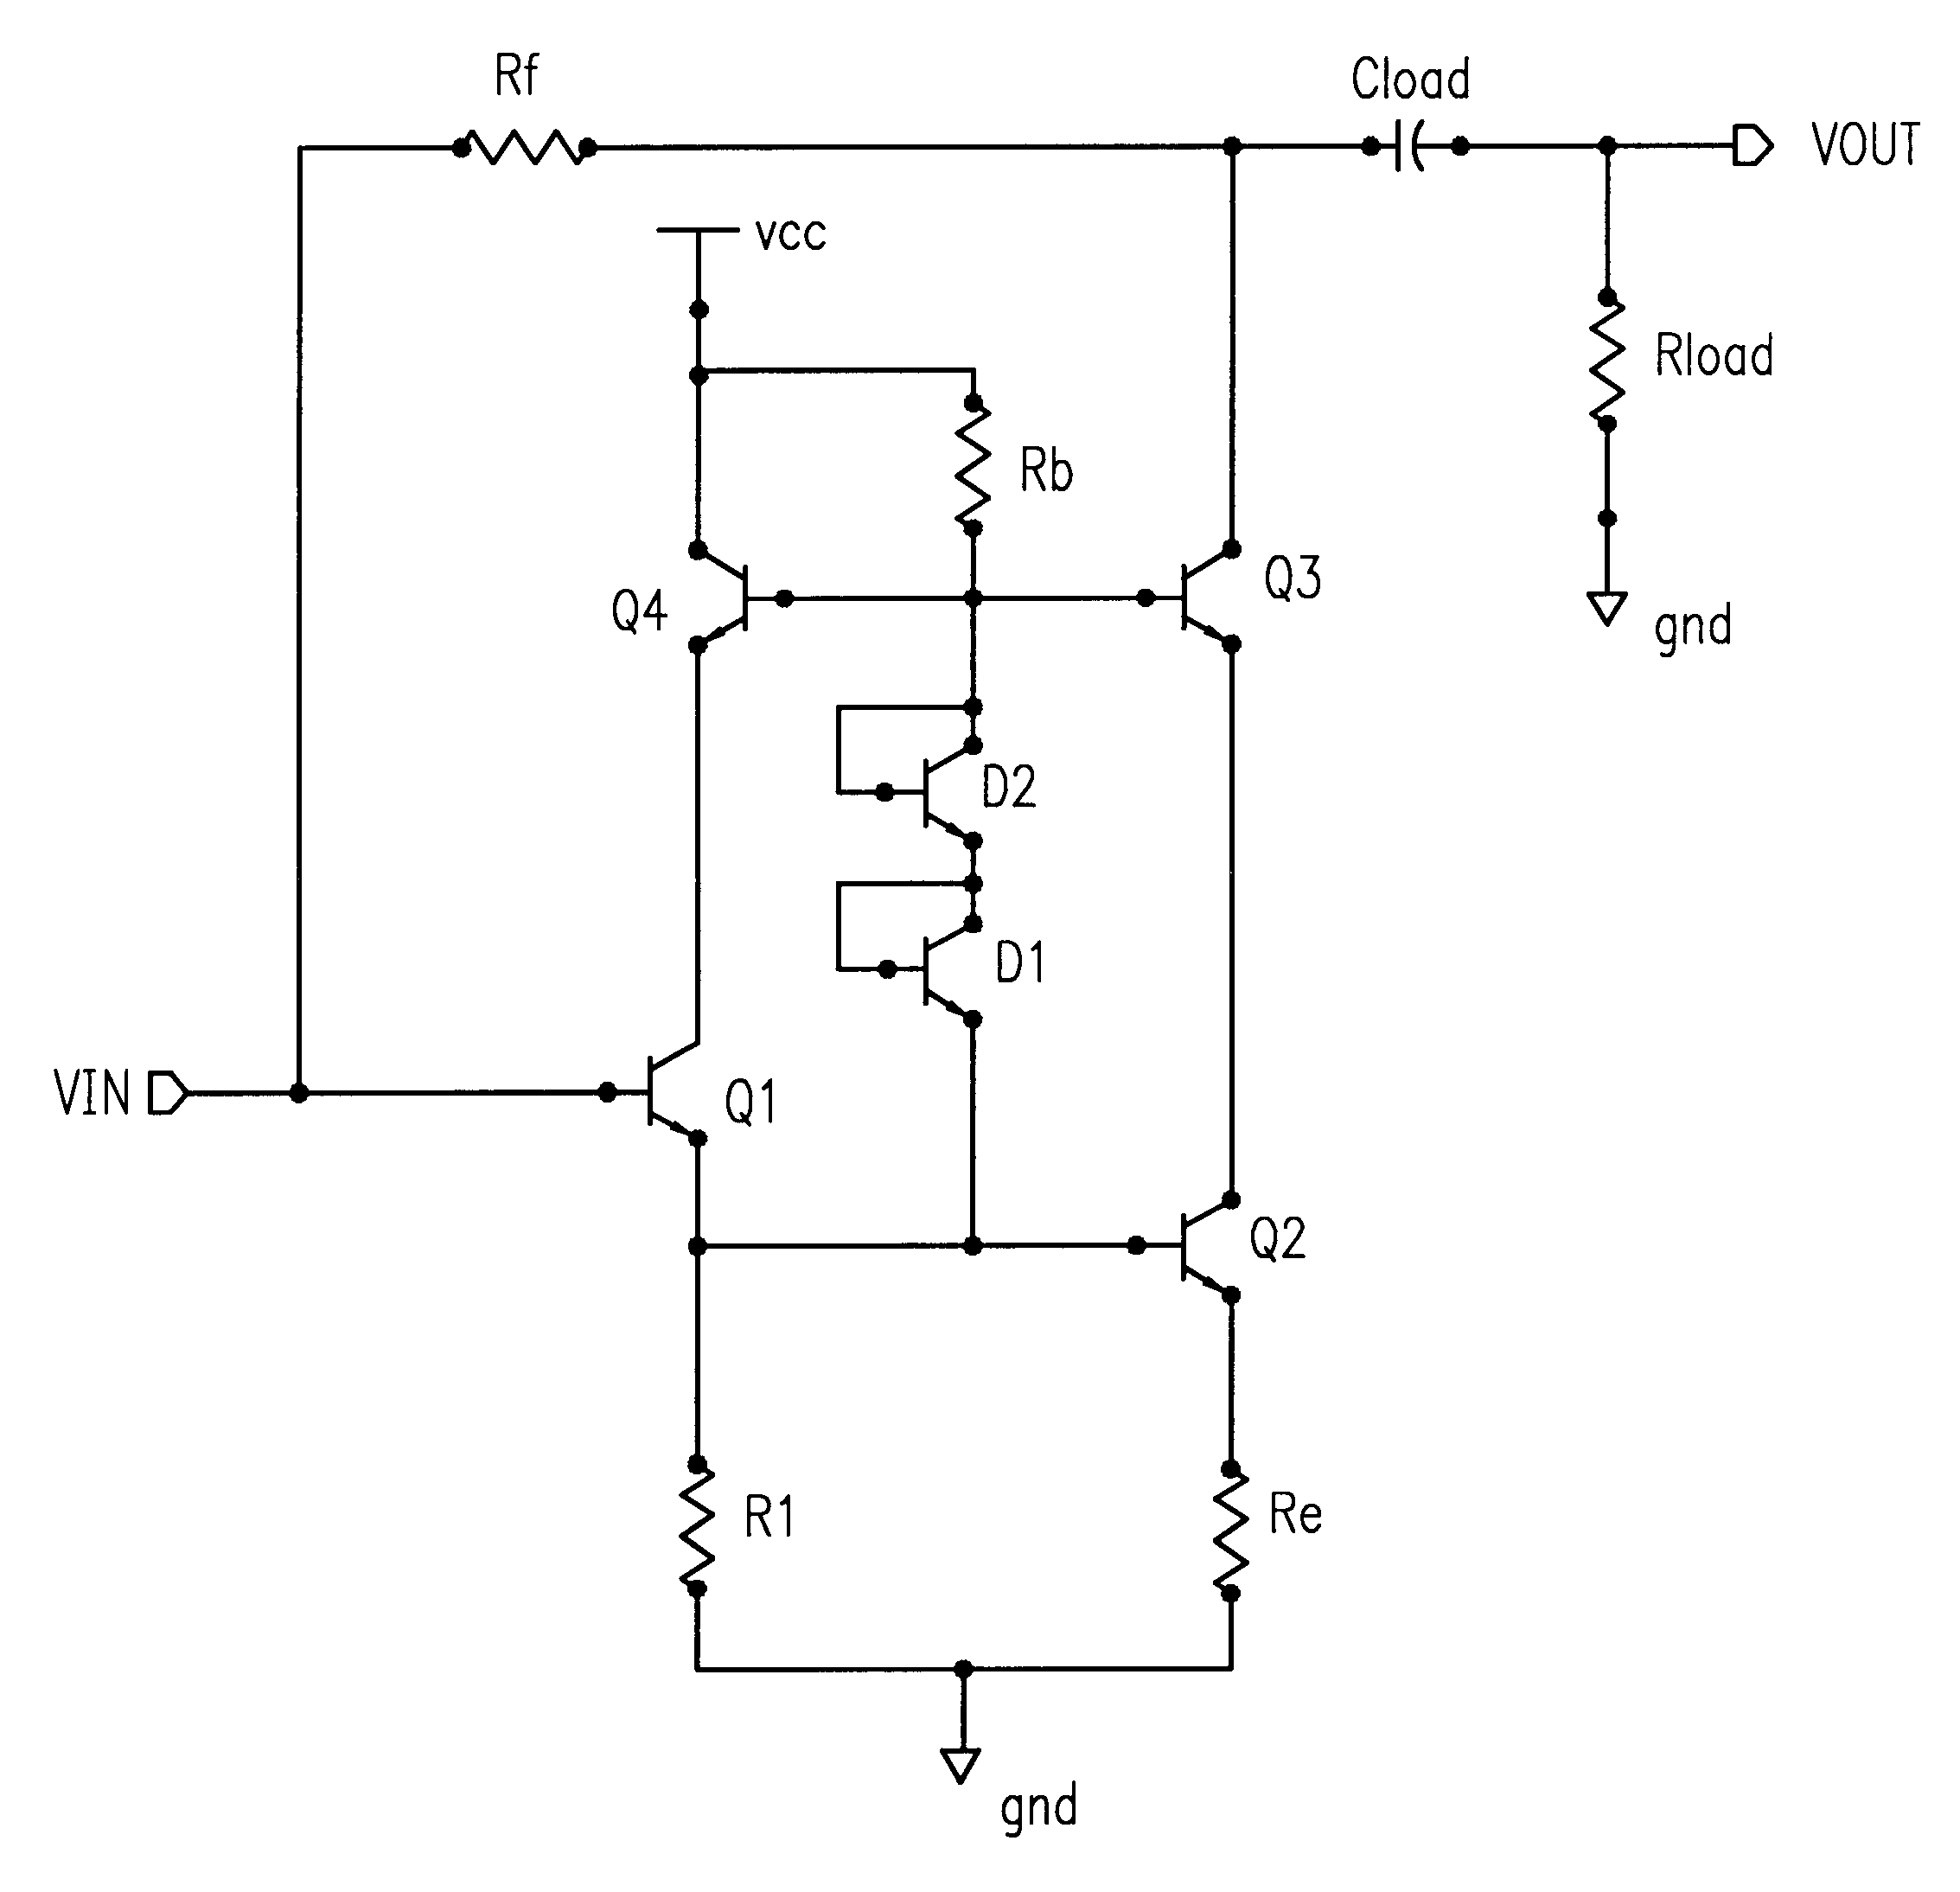 Low noise, low distortion RF amplifier topology